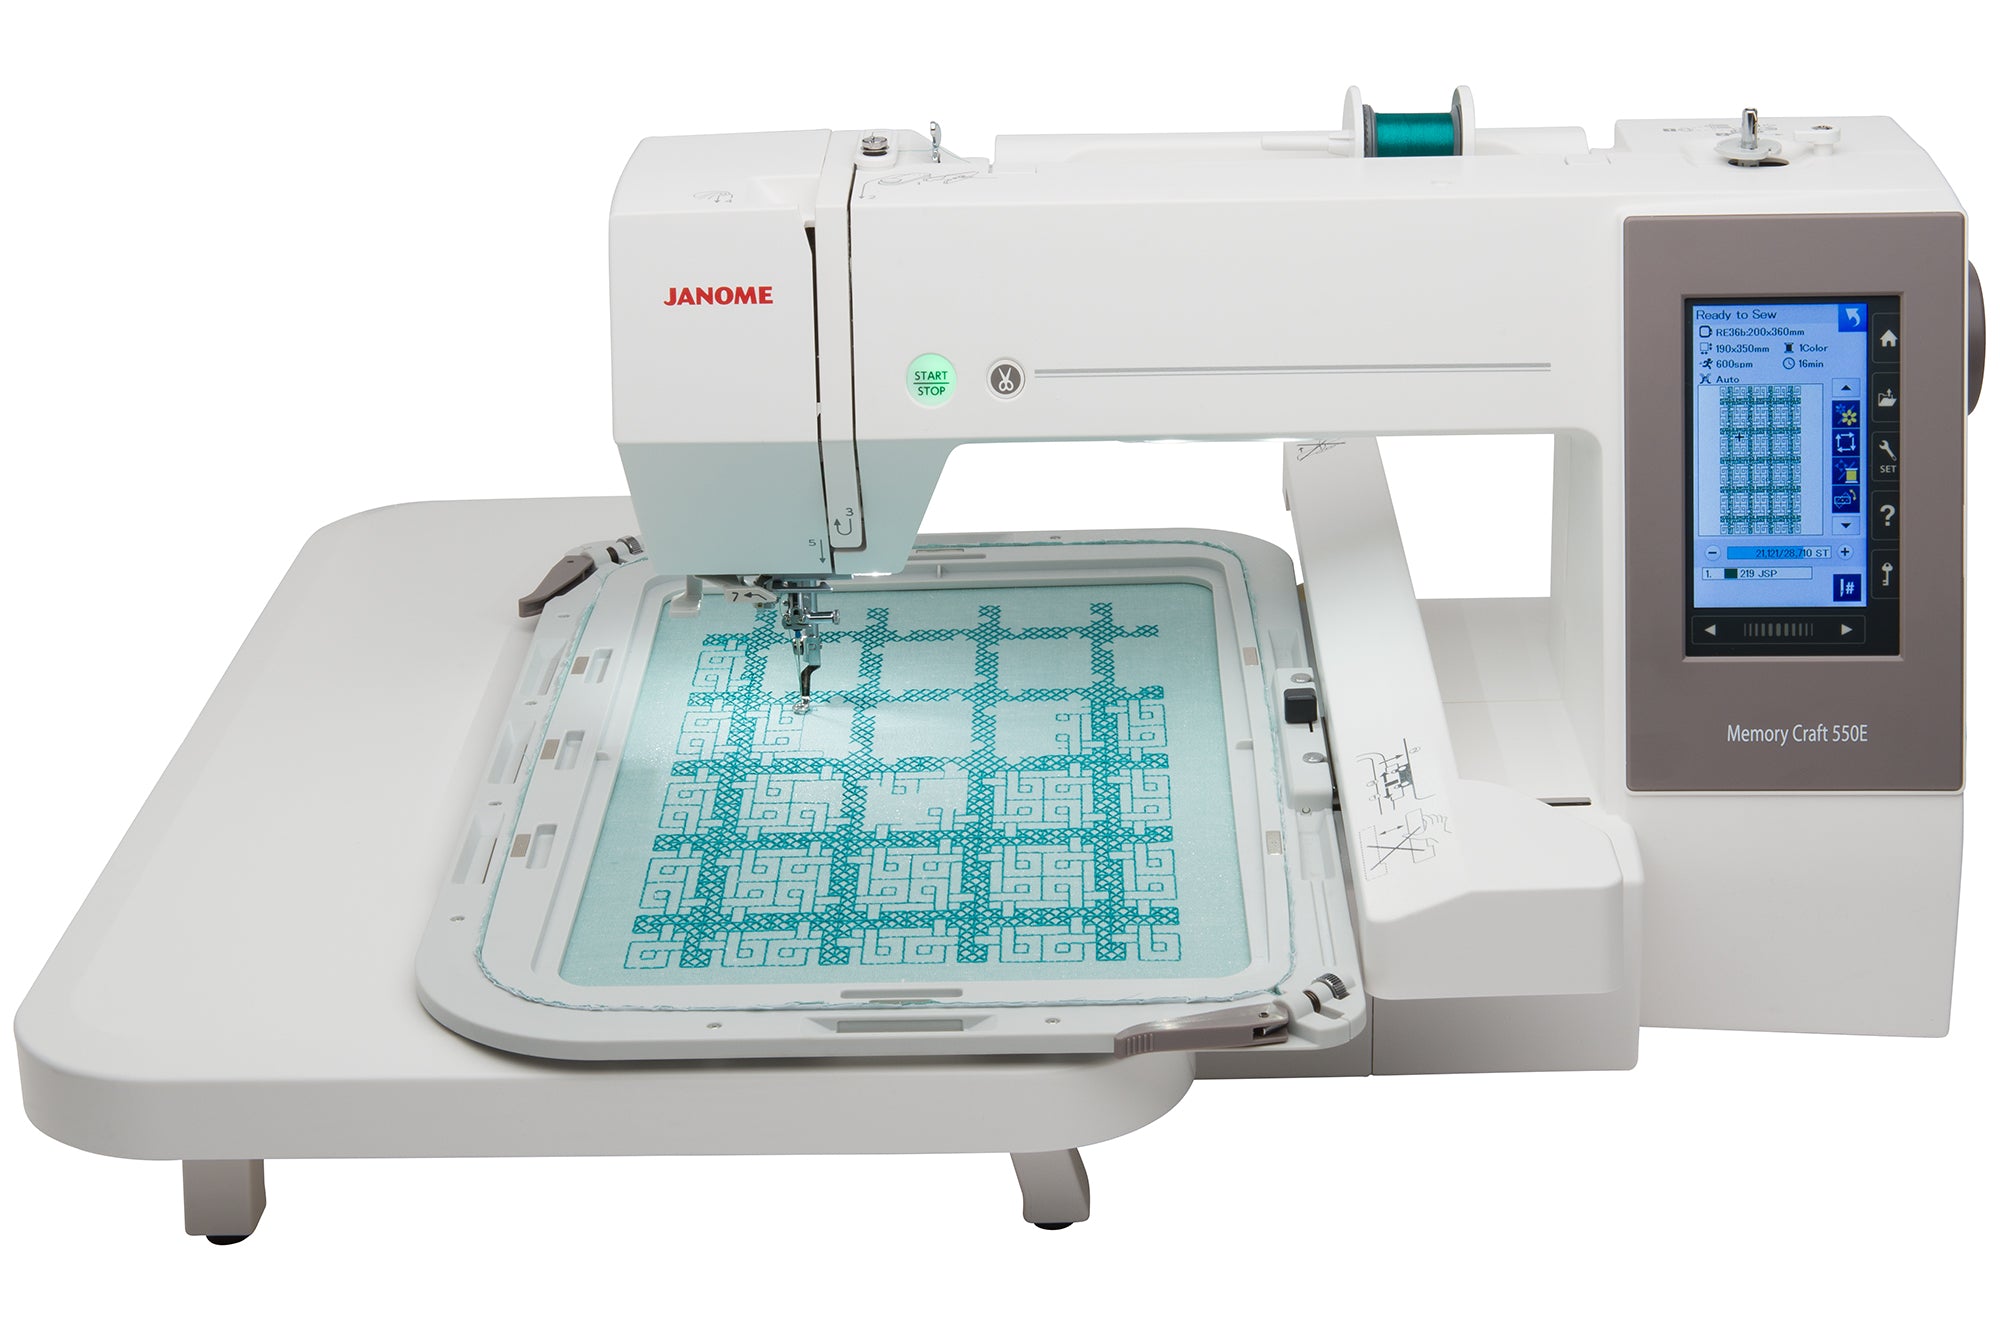 front facing image of the Janome MC550E Memory Craft Embroidery Machine with hoop attached